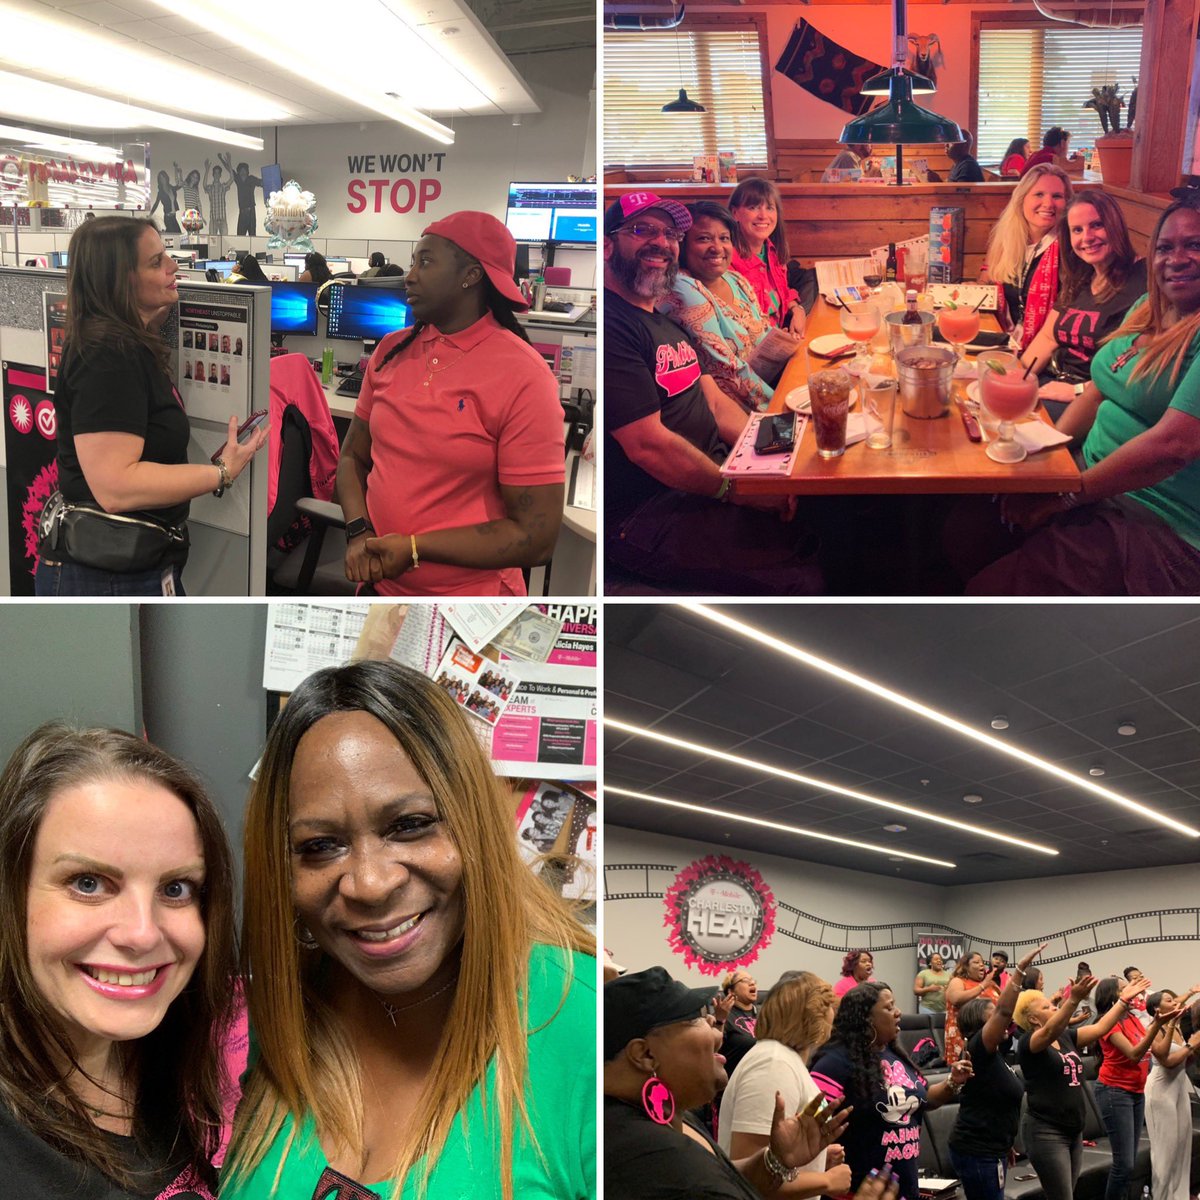 #CharlestonHeat always on 🔥
From #FireStarters to #FireFigHteRs to the #CharlestonHeatChoir !
Talent and Southern Hospitality at its finest! 
#1HR
#FamousForCare 
#FamousForCareers